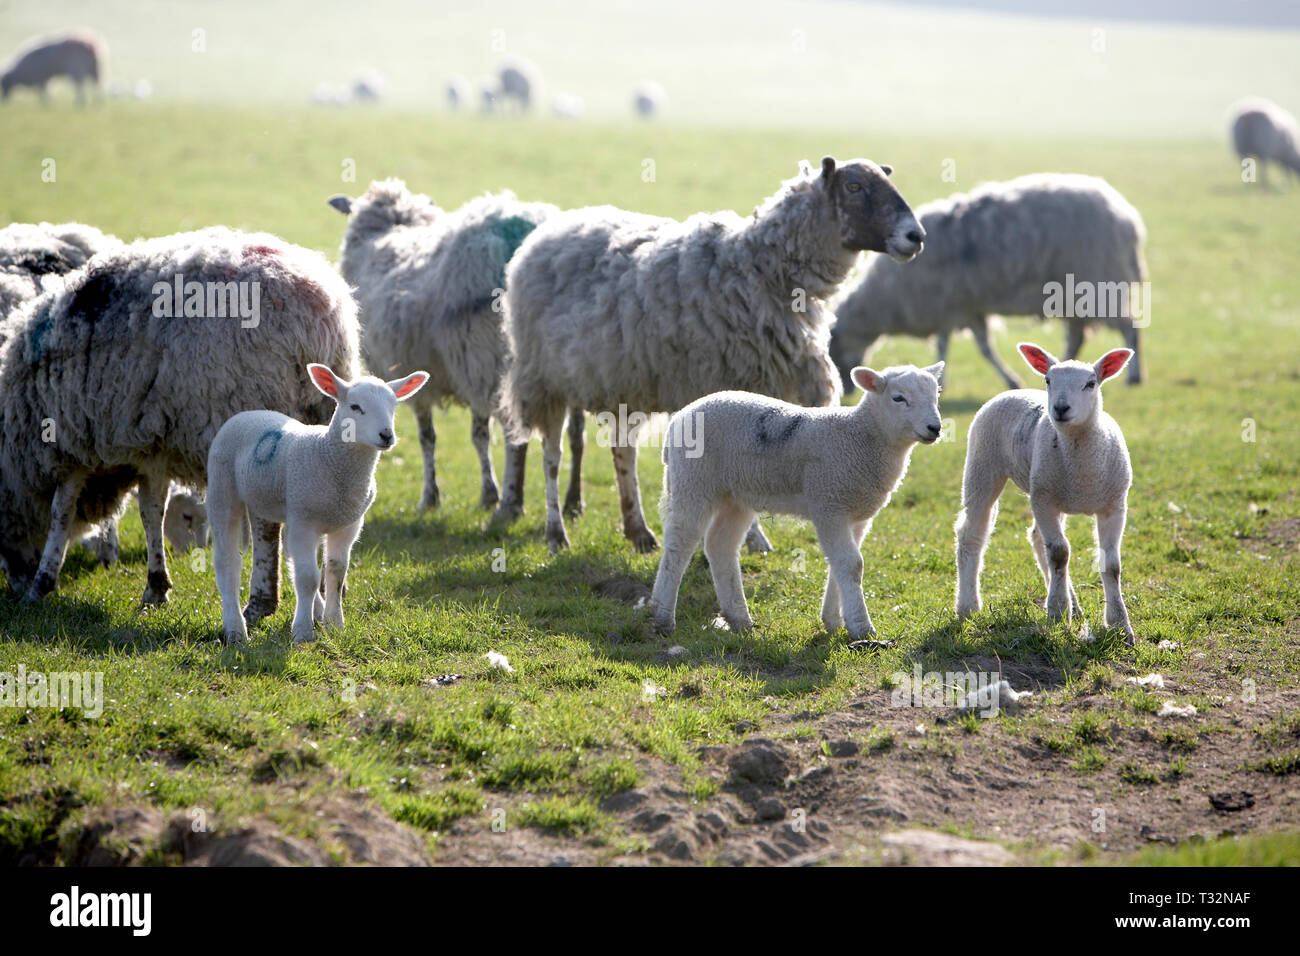 Lambs in field with sheep Stock Photo